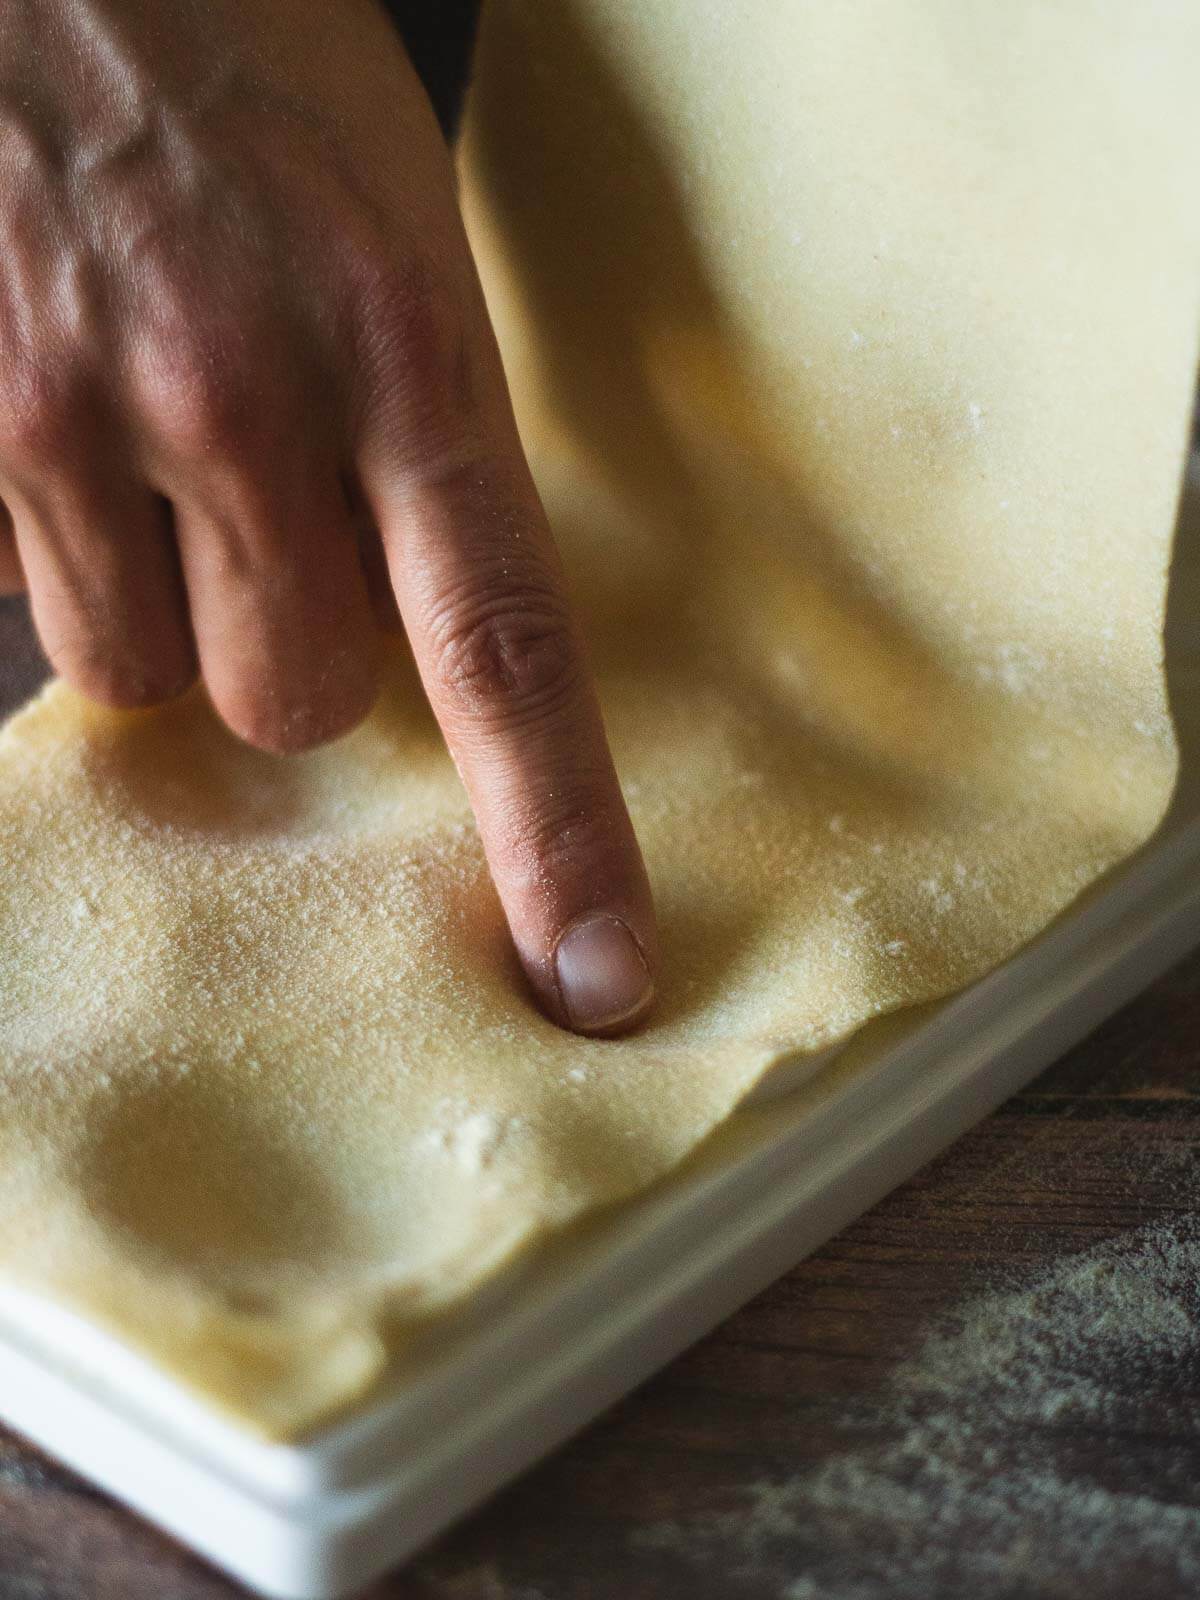 stretch the pasta sheet over the pasta tray and gently press the dough to make room for the filling